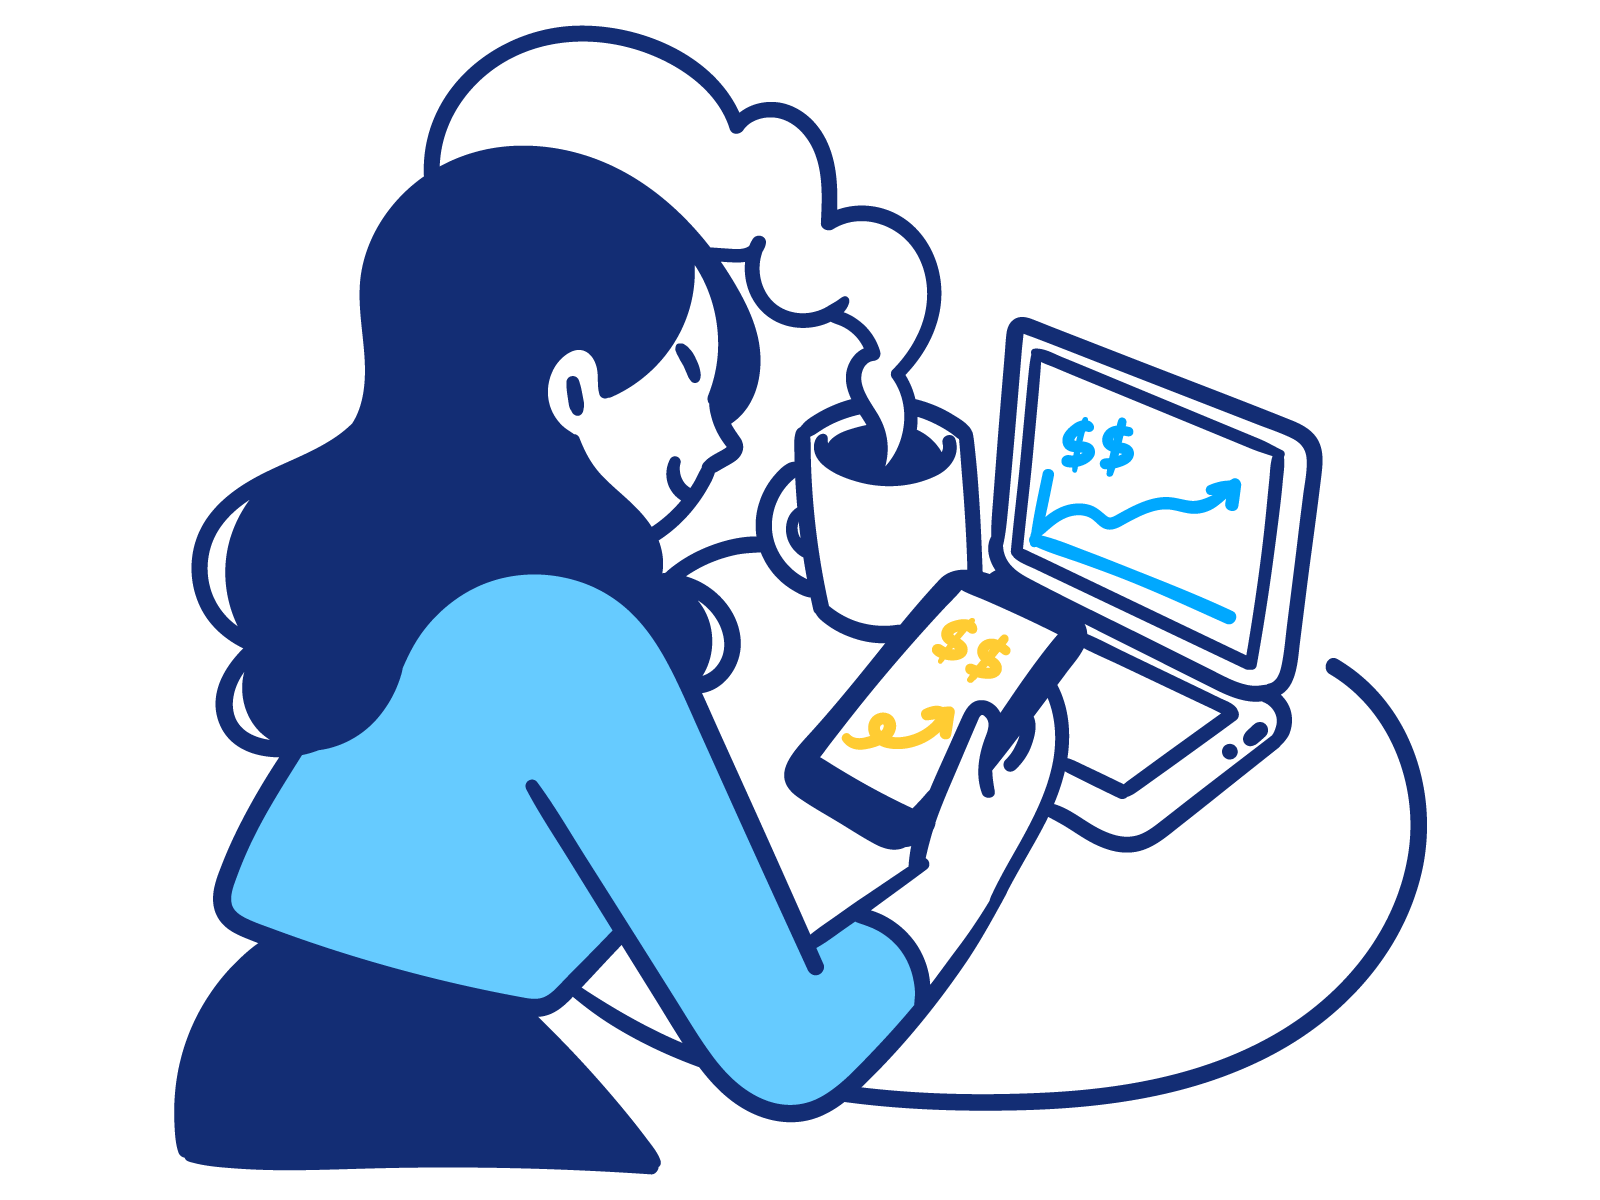 Crunchtime illustration of a woman saving money and using technology